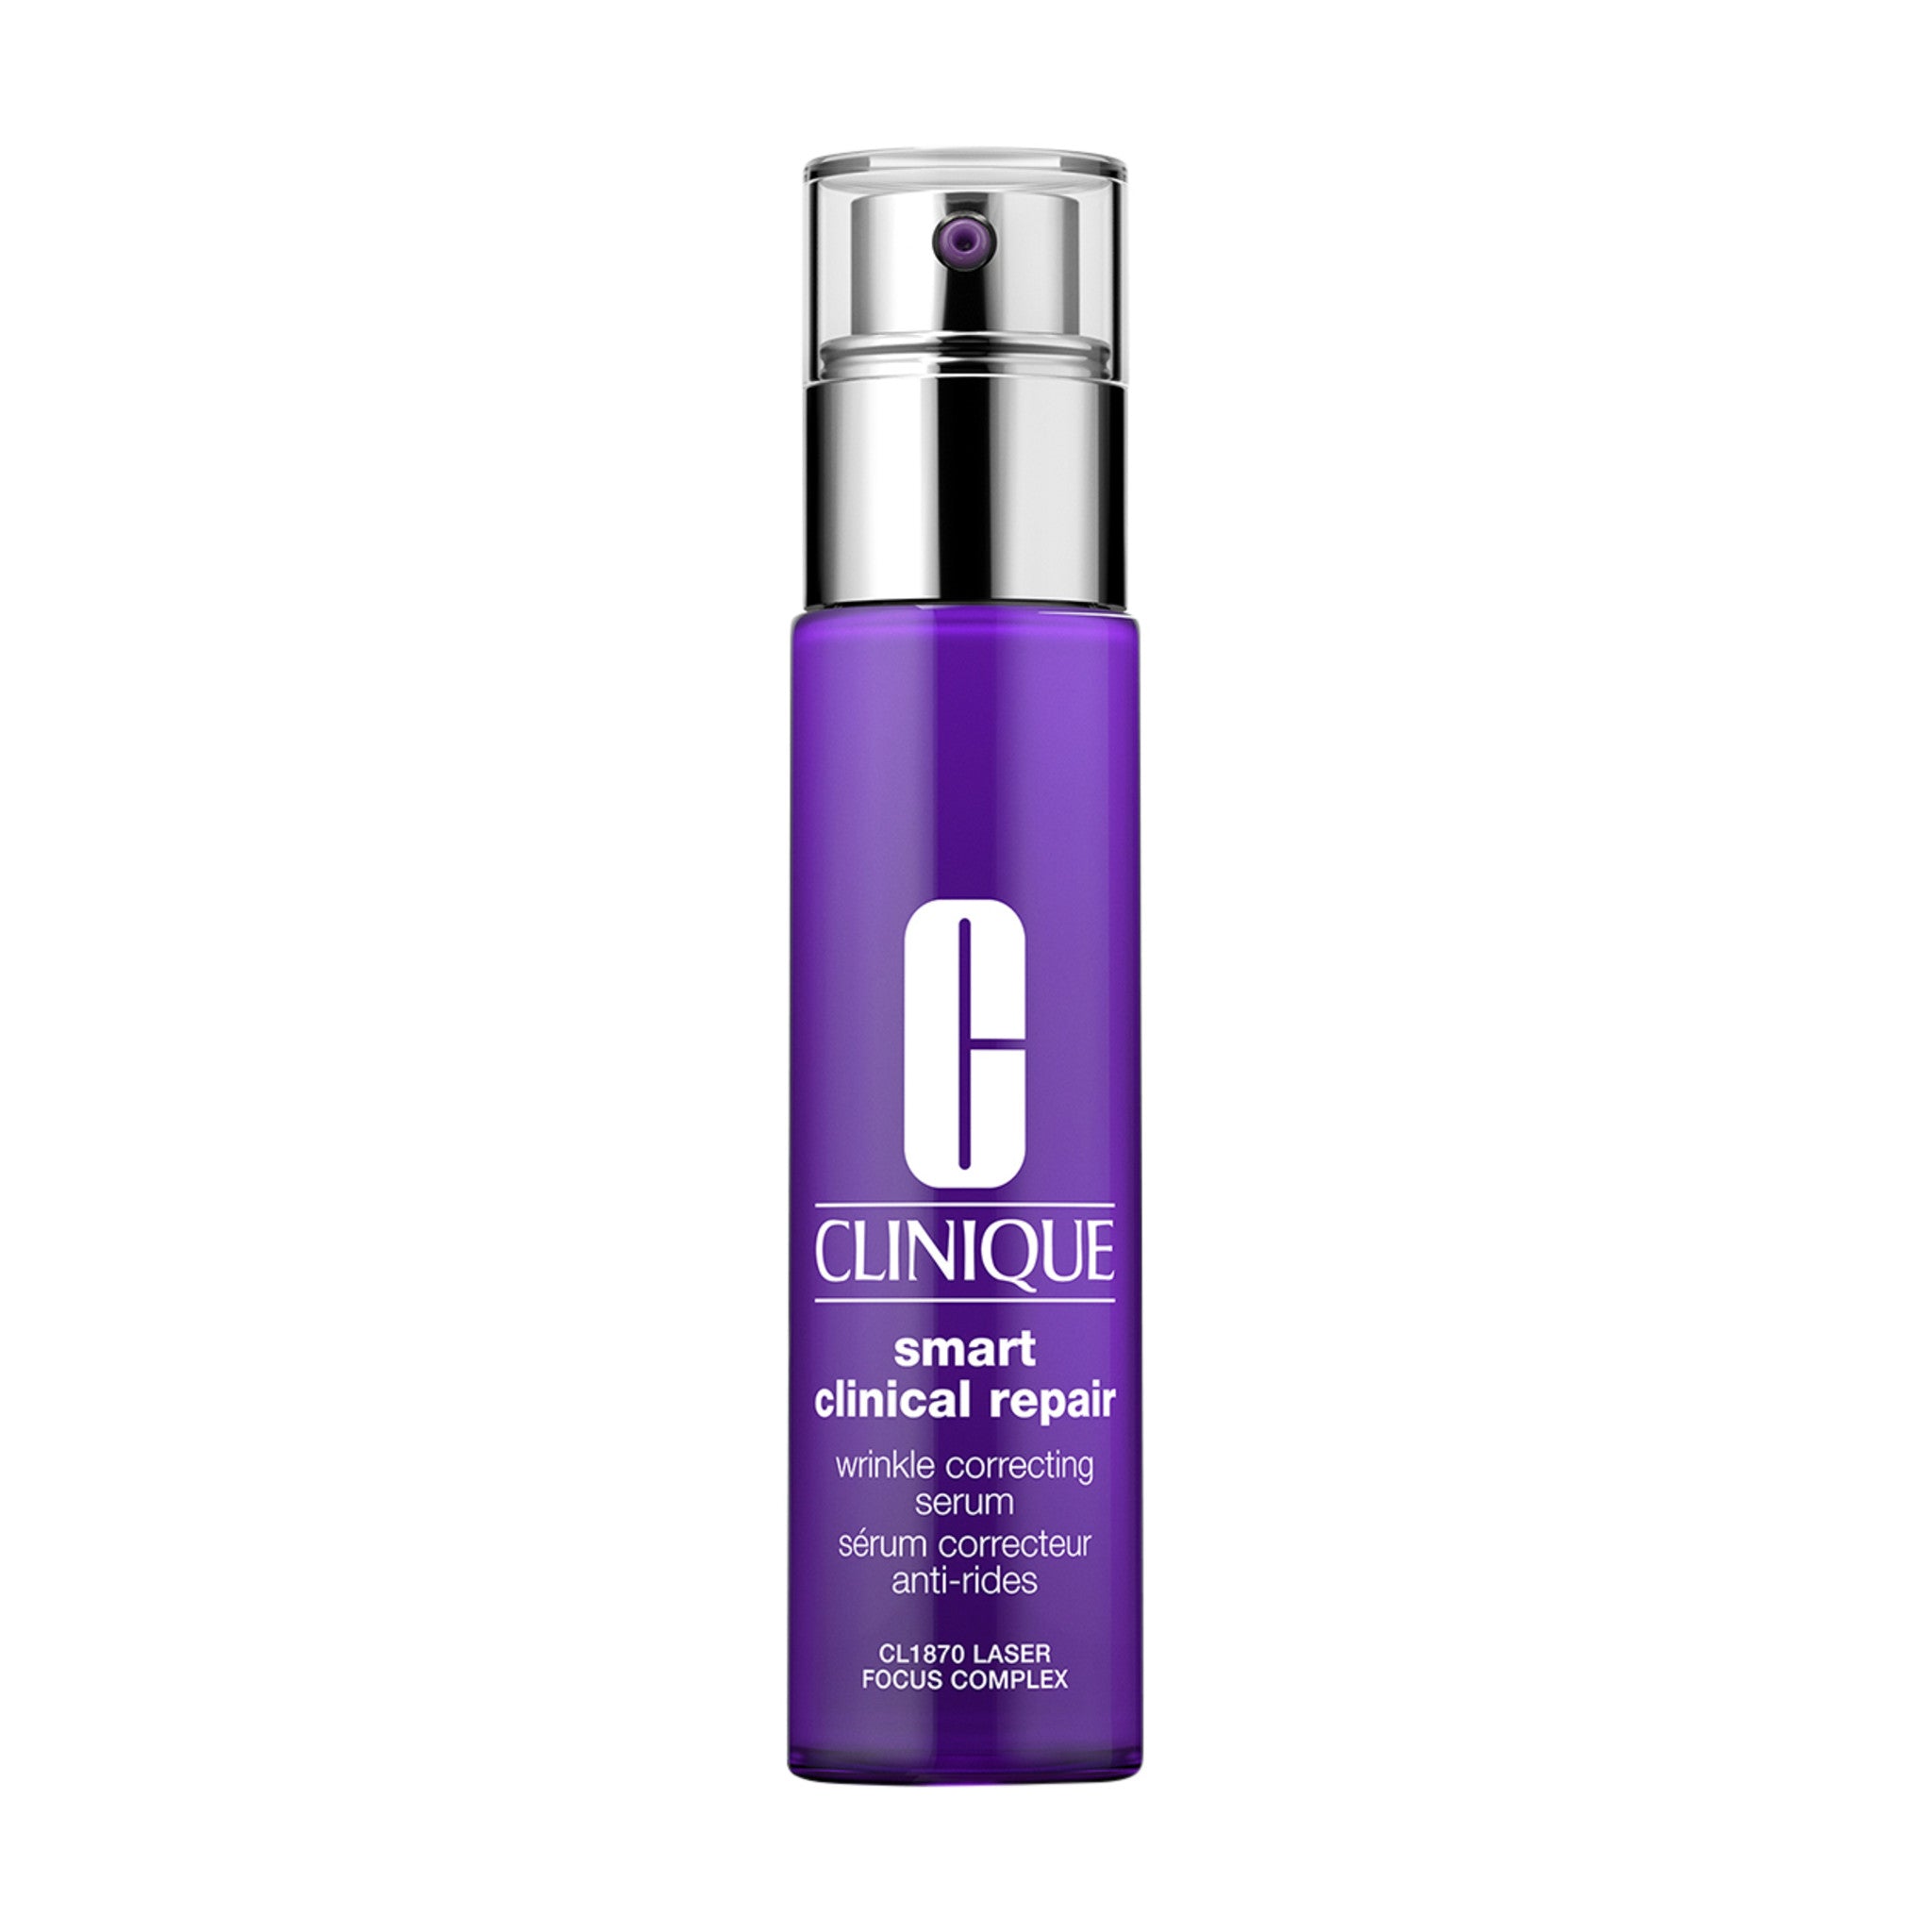 Clinique Smart Clinical Repair Wrinkle Correcting Serum Size variant: 1 oz | 30 ml main image.